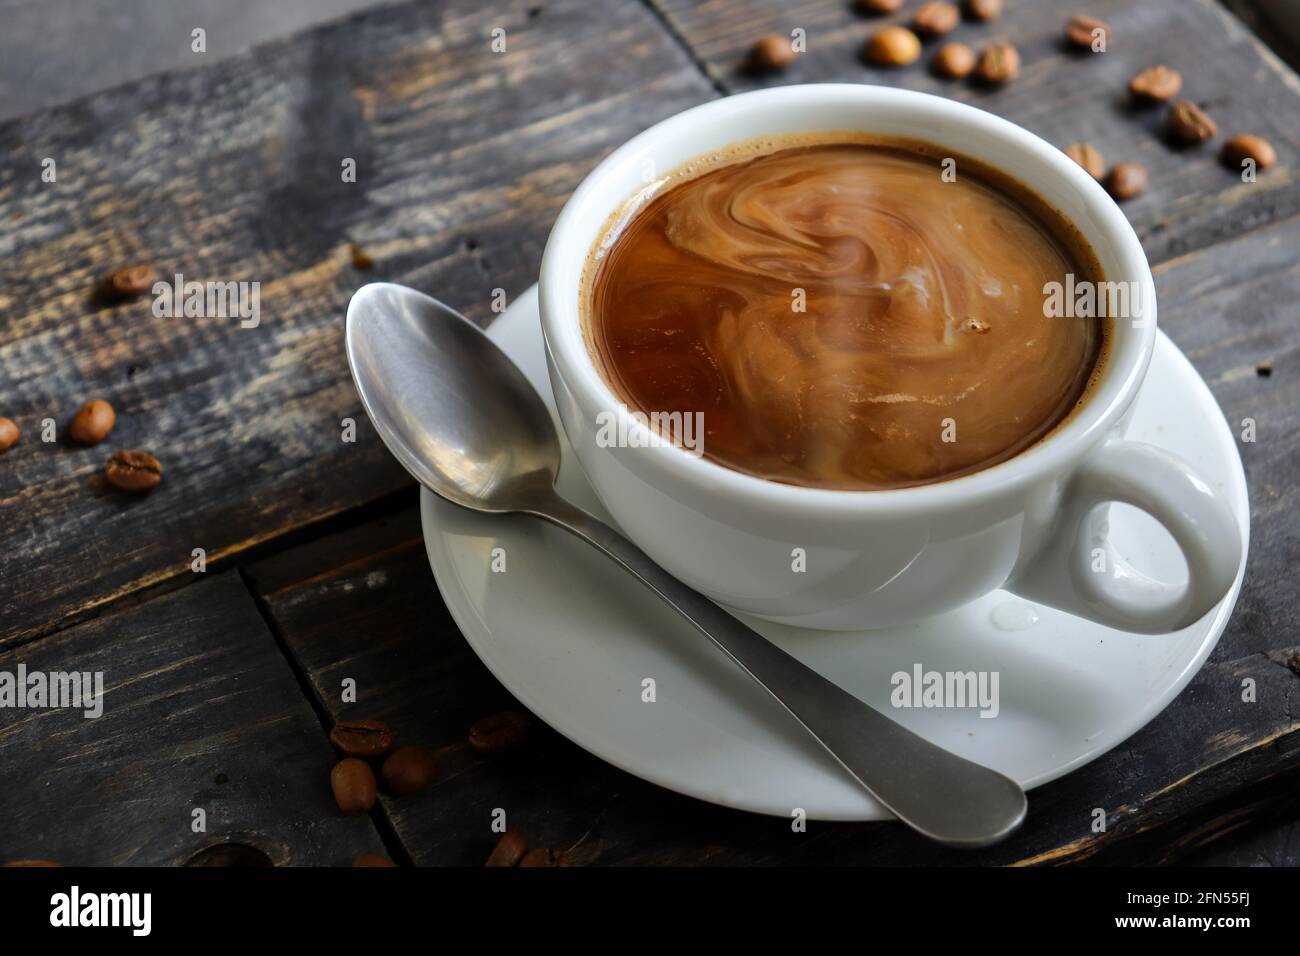 Coffee cup and coffee beans. Copy space. Espresso or Americano in a cup. Wooden background. Stock Photo